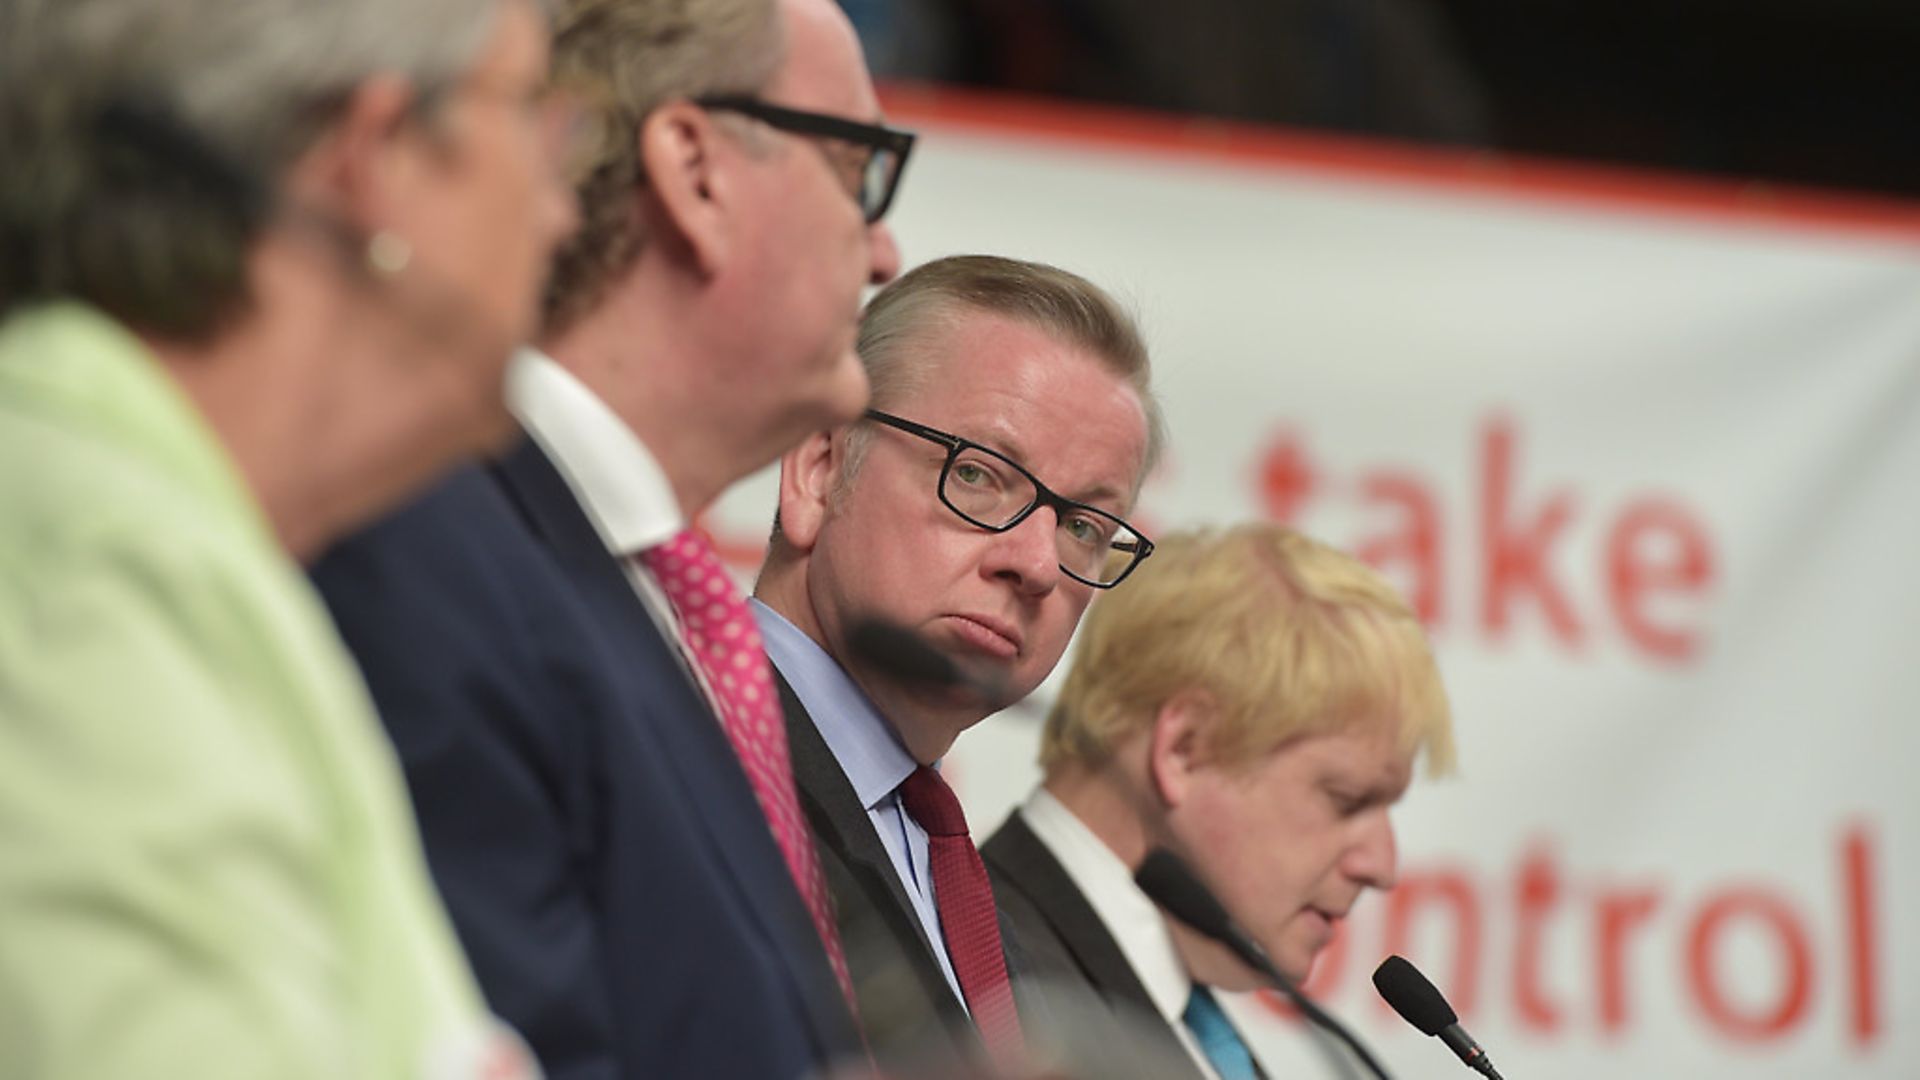 Michael Gove and Boris Johnson during a Vote Leave EU referendum campaign event. Picture: PA - Credit: PA Archive/PA Images